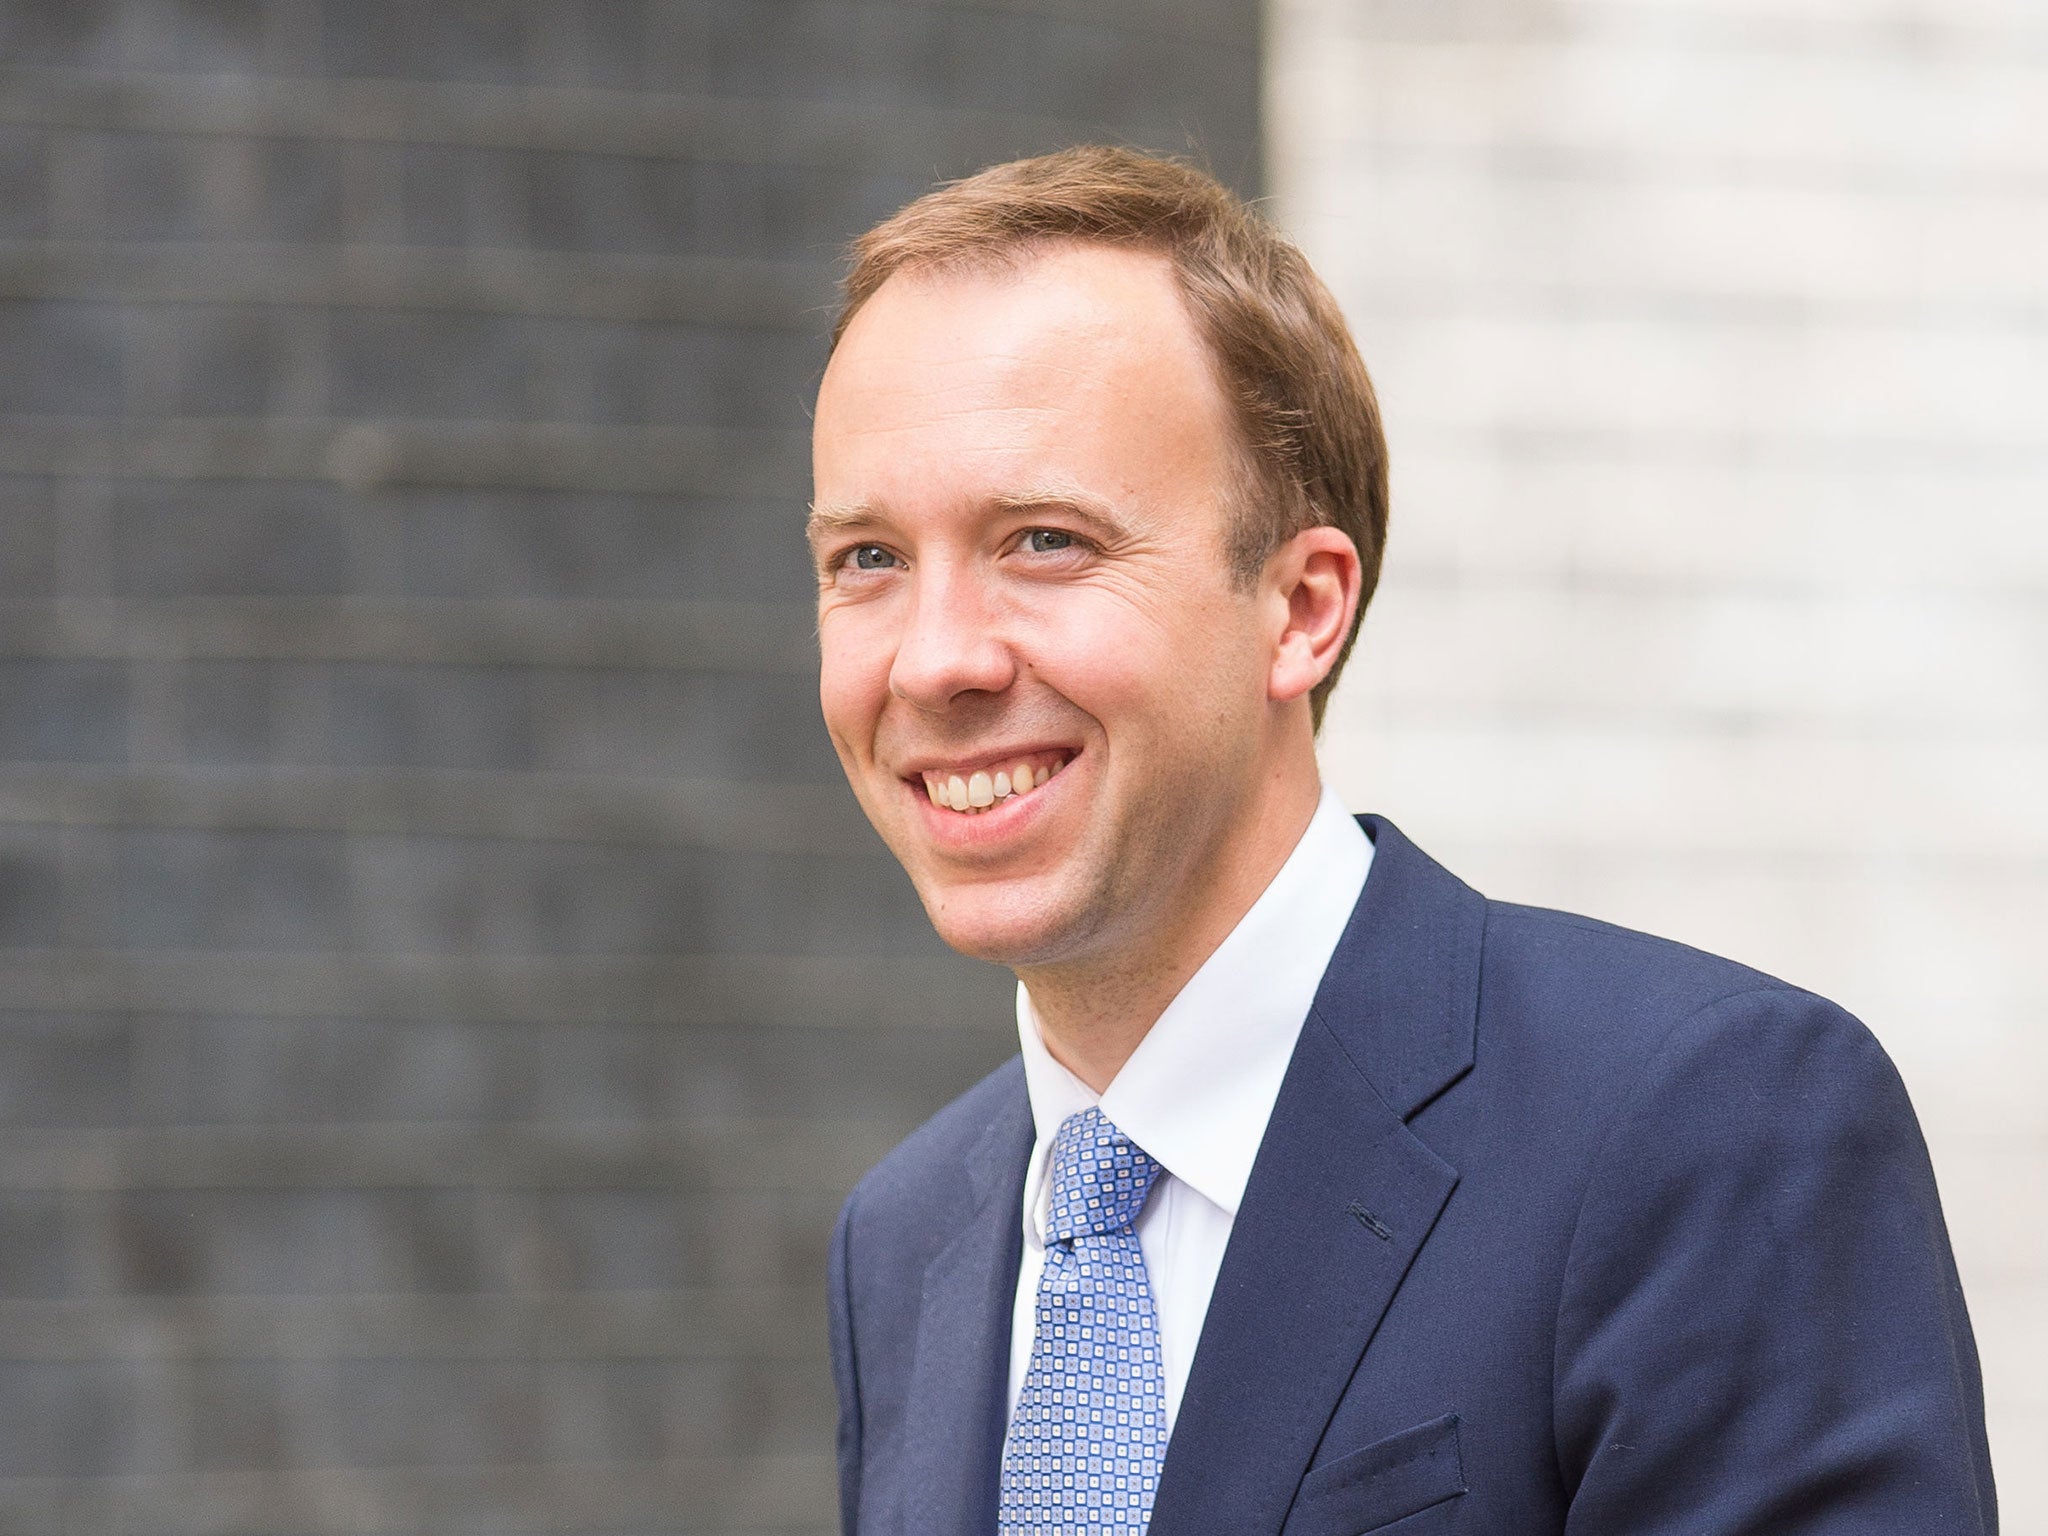 New Culture Secretary Matthew Hancock says he will raise equal pay with the BBC’s director general